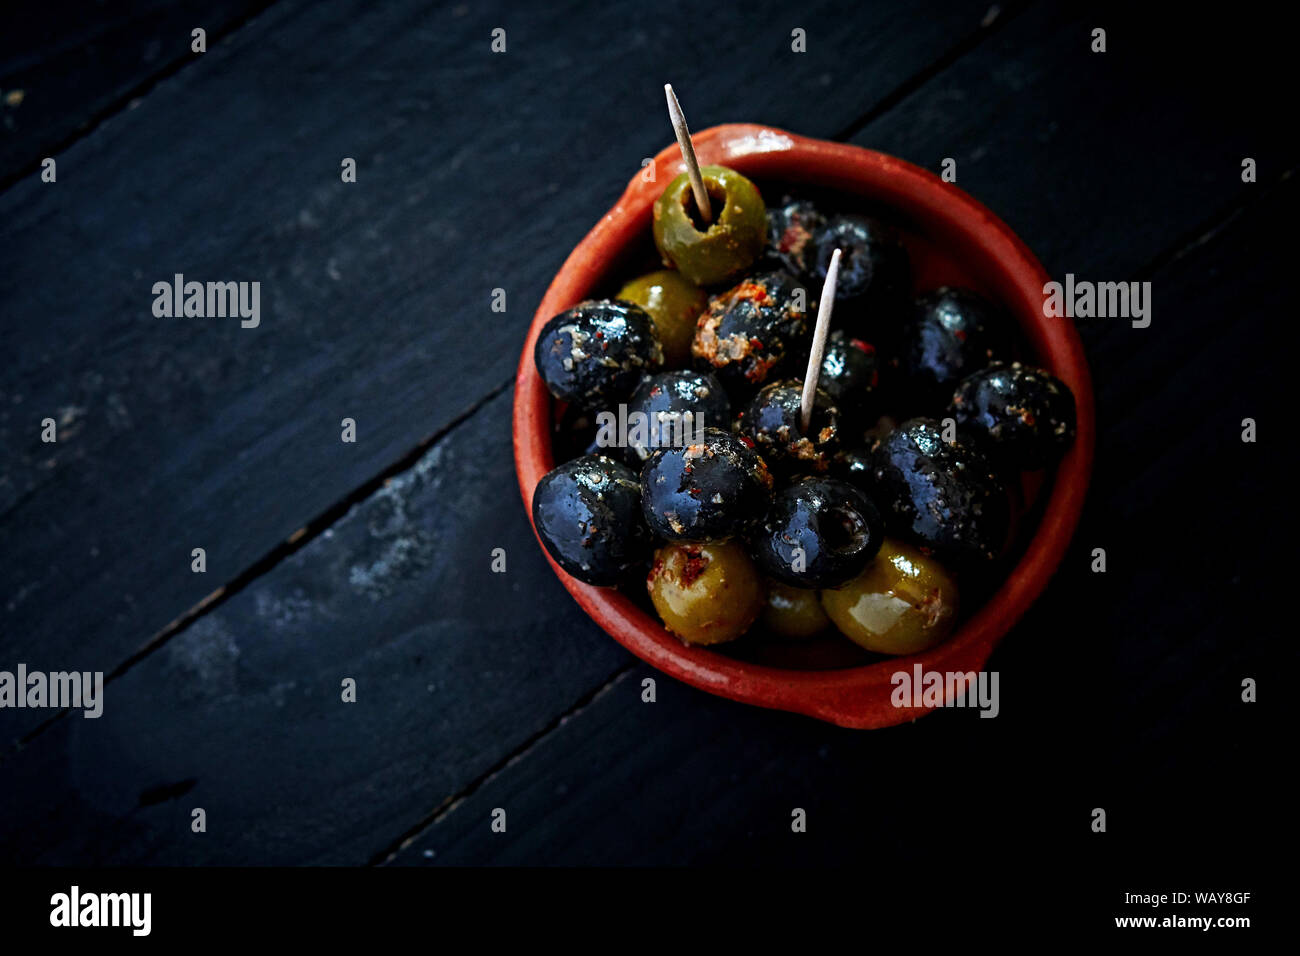 Olives from above in a Tapas-Cup at a Tapas restaurant Stock Photo